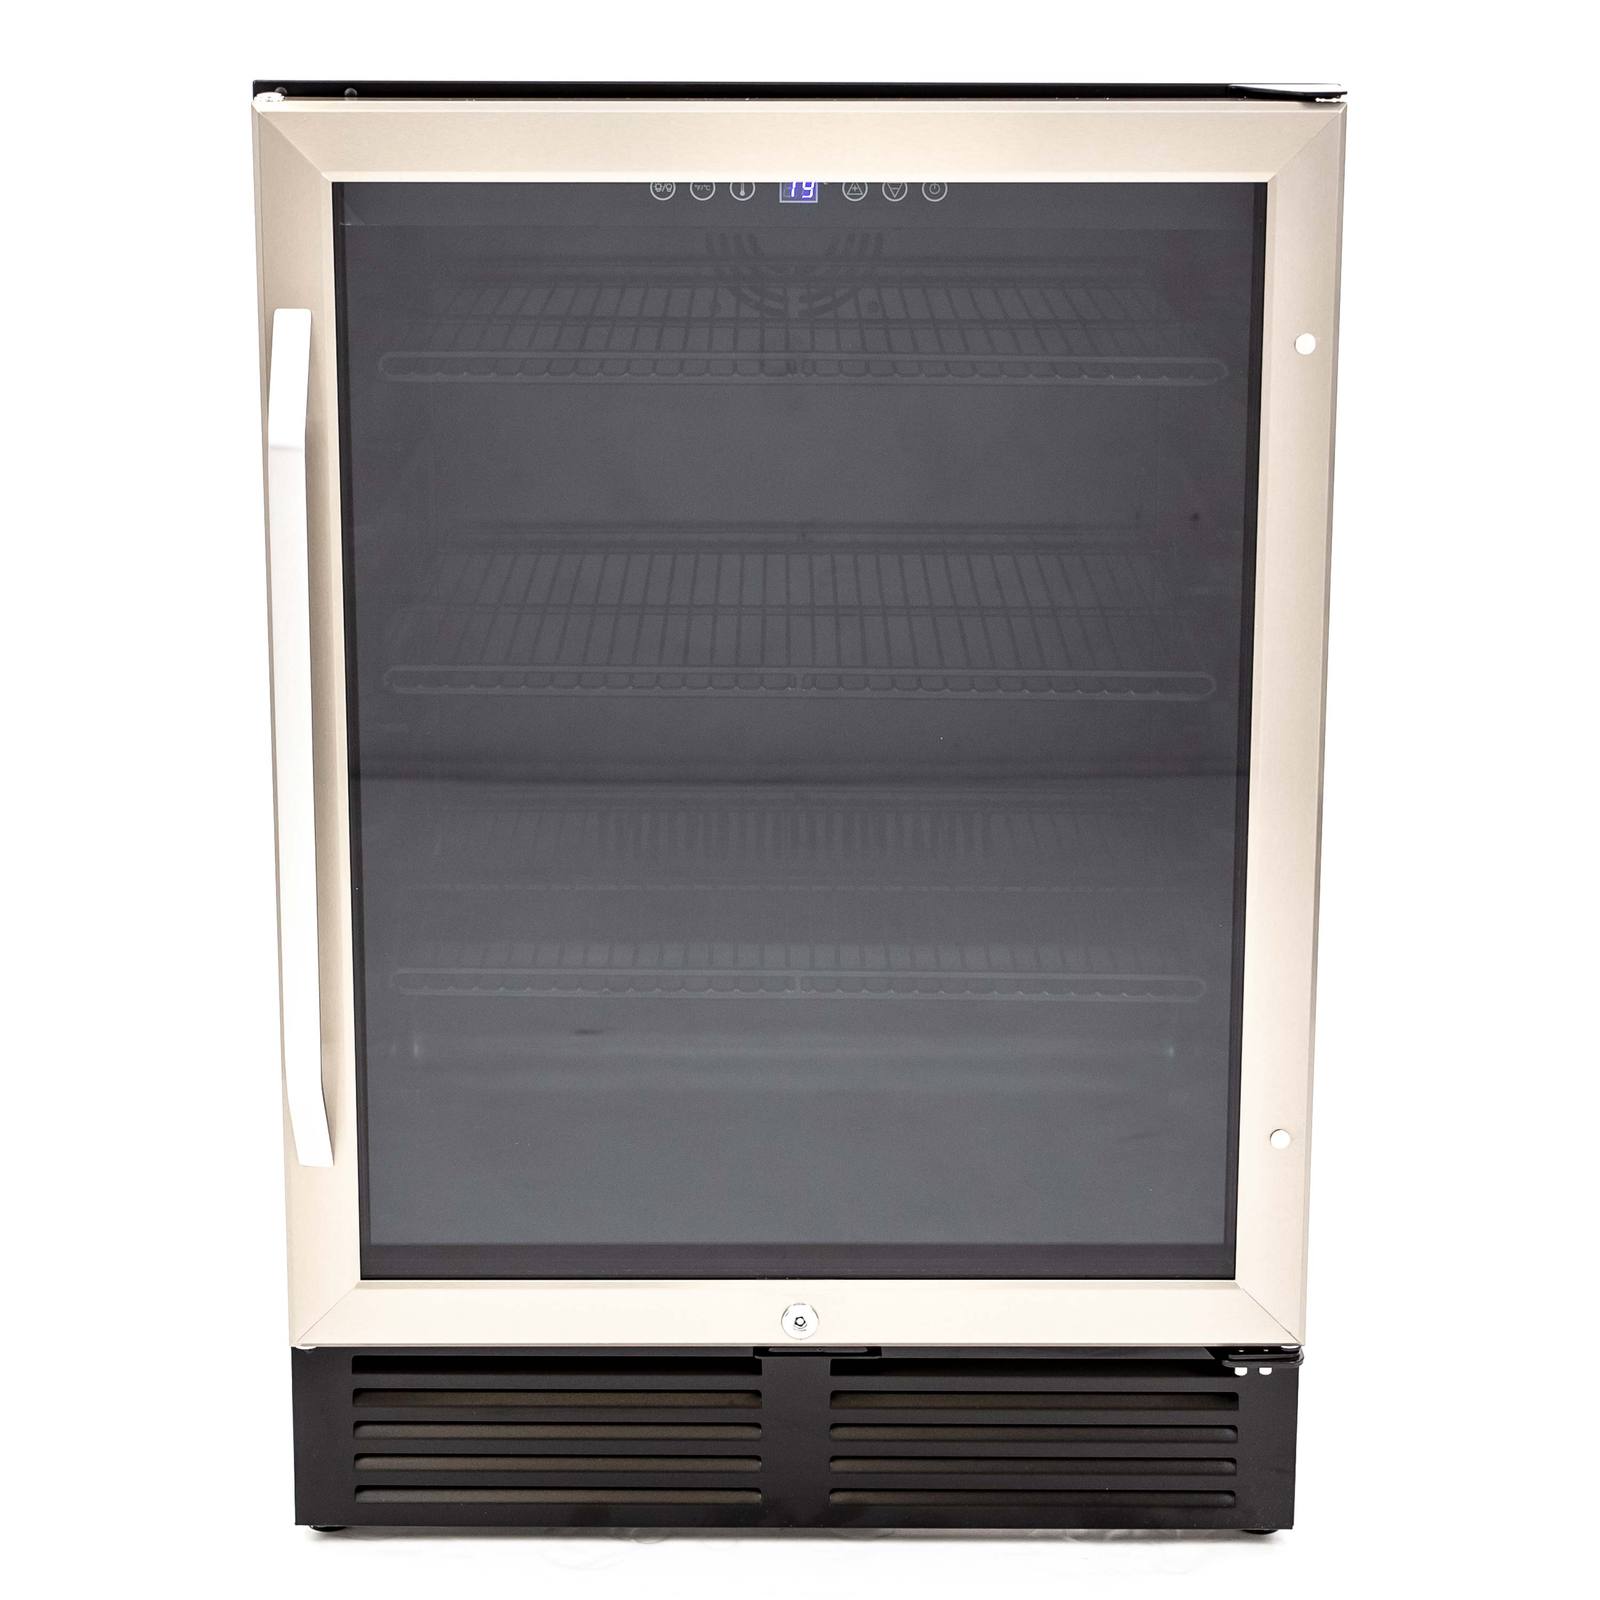 Avanti Beverage Center, 130 Can Capacity - Stainless Steel / 5.0 cu. ft.